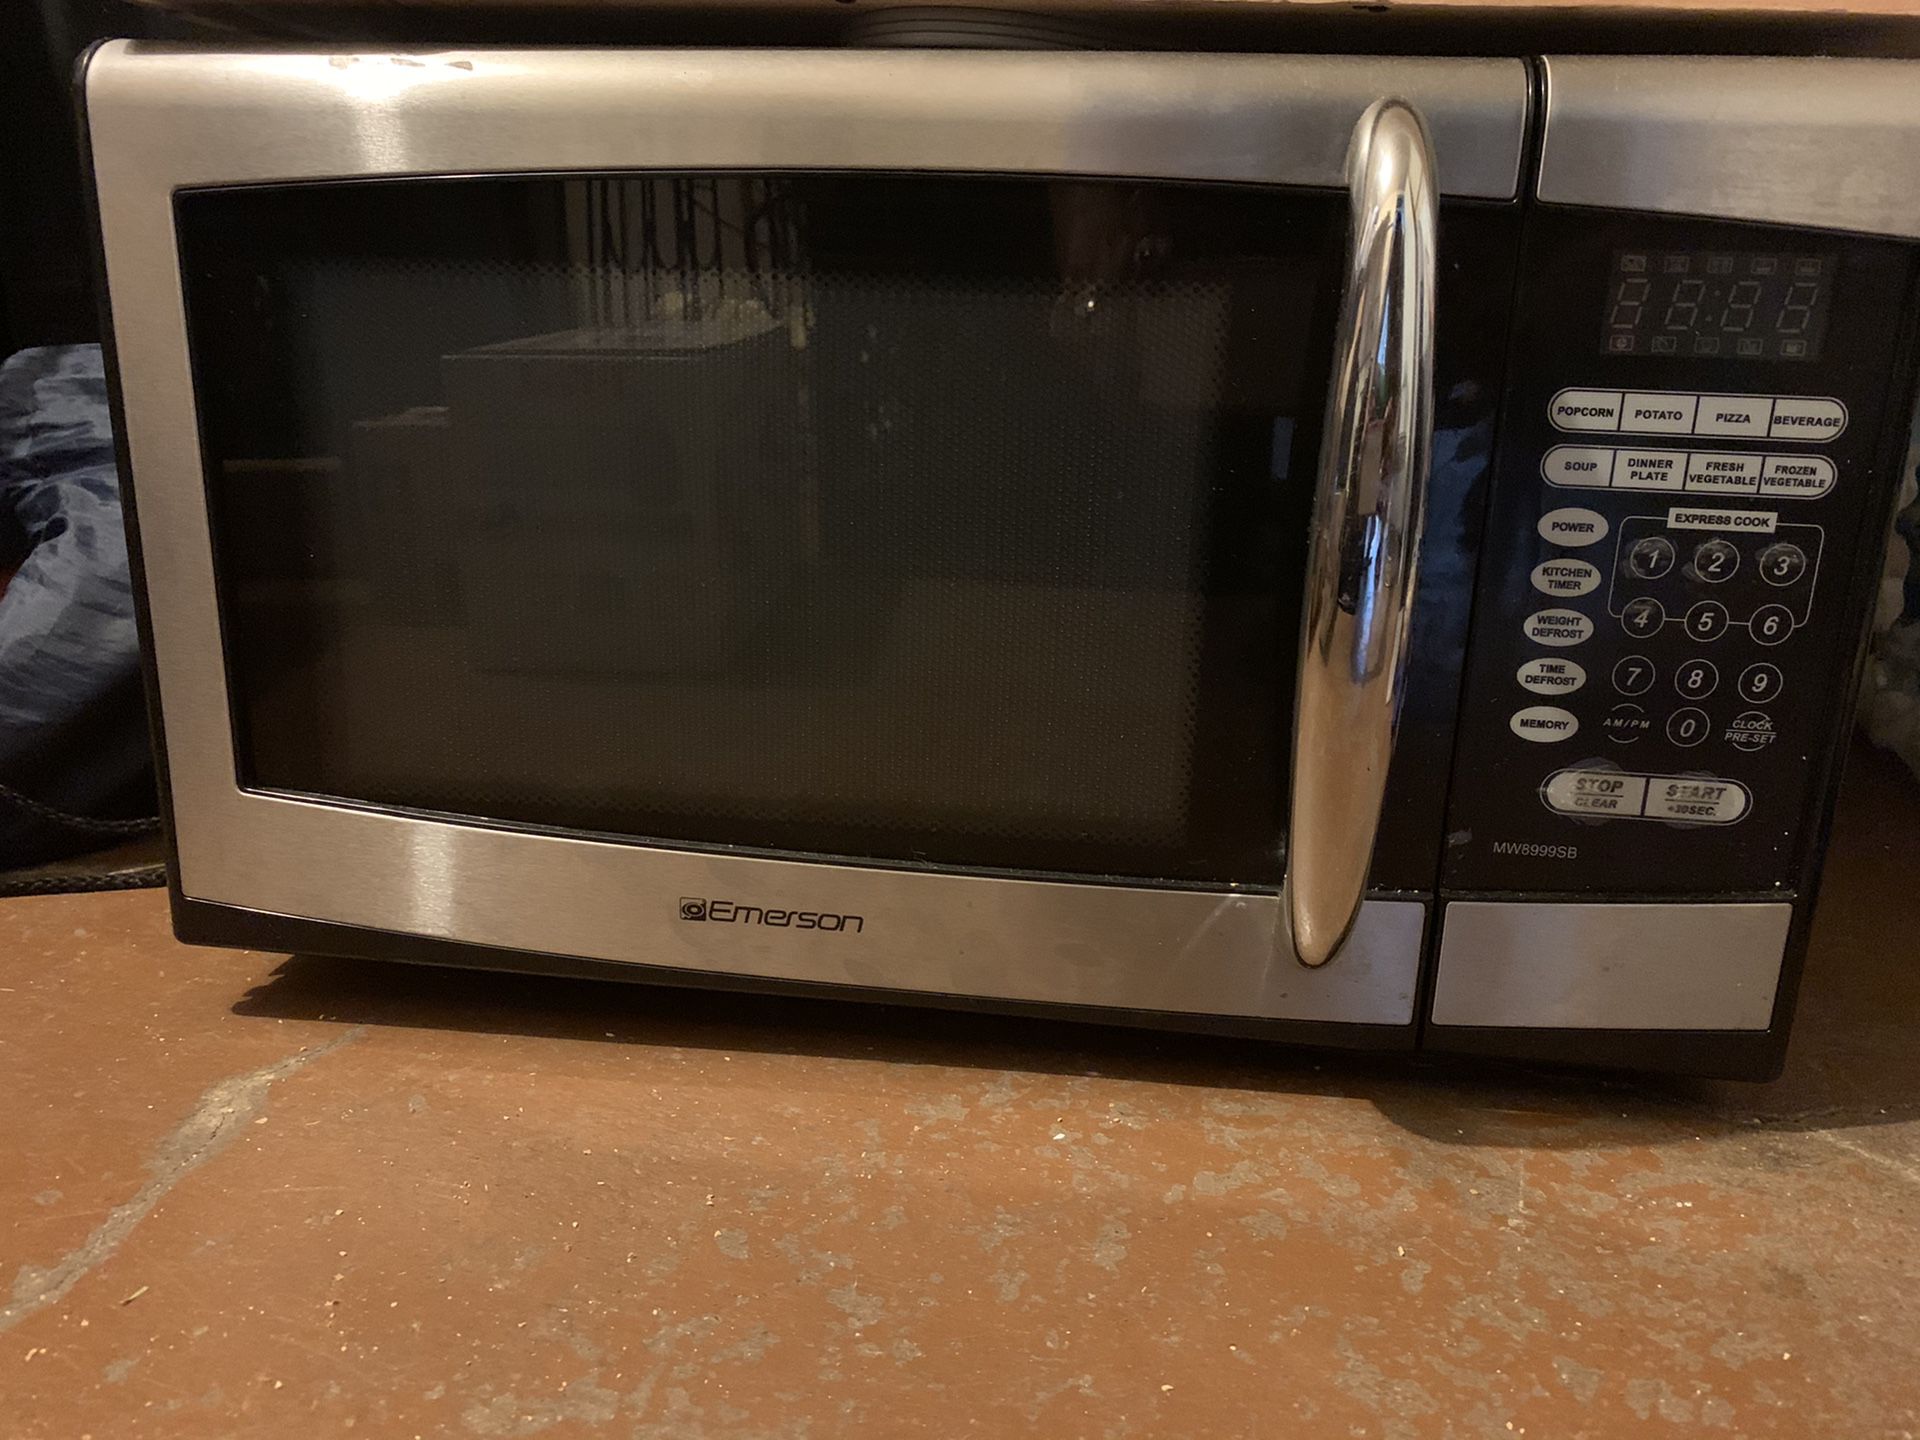 Microwave - great condition!